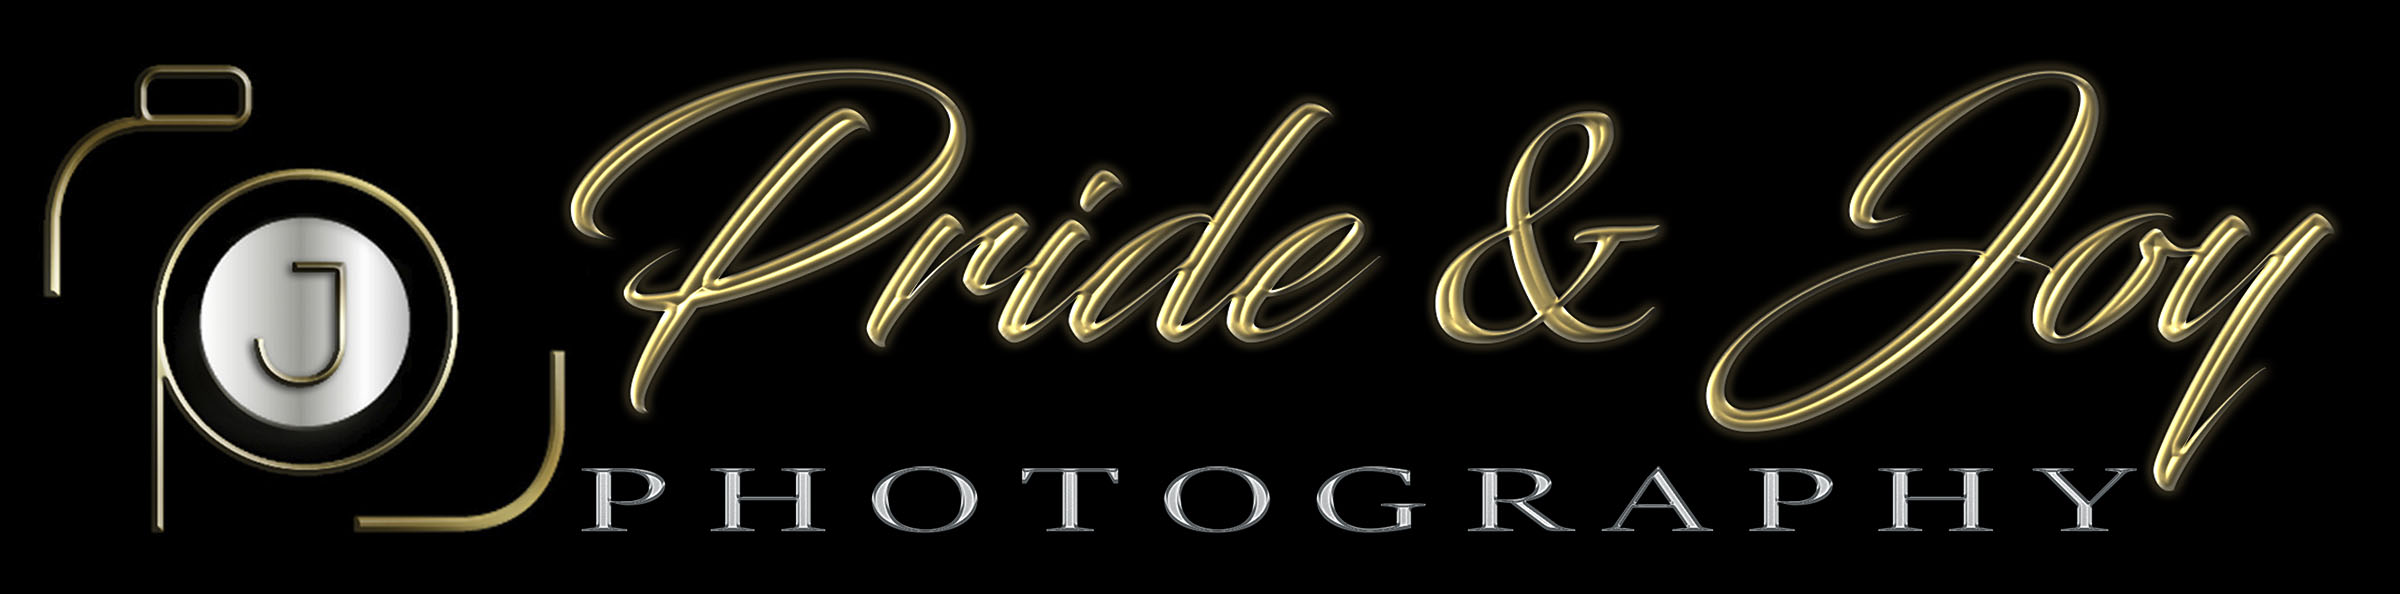 Pride and Joy Photography logo on deep black background with a gold and silver font.